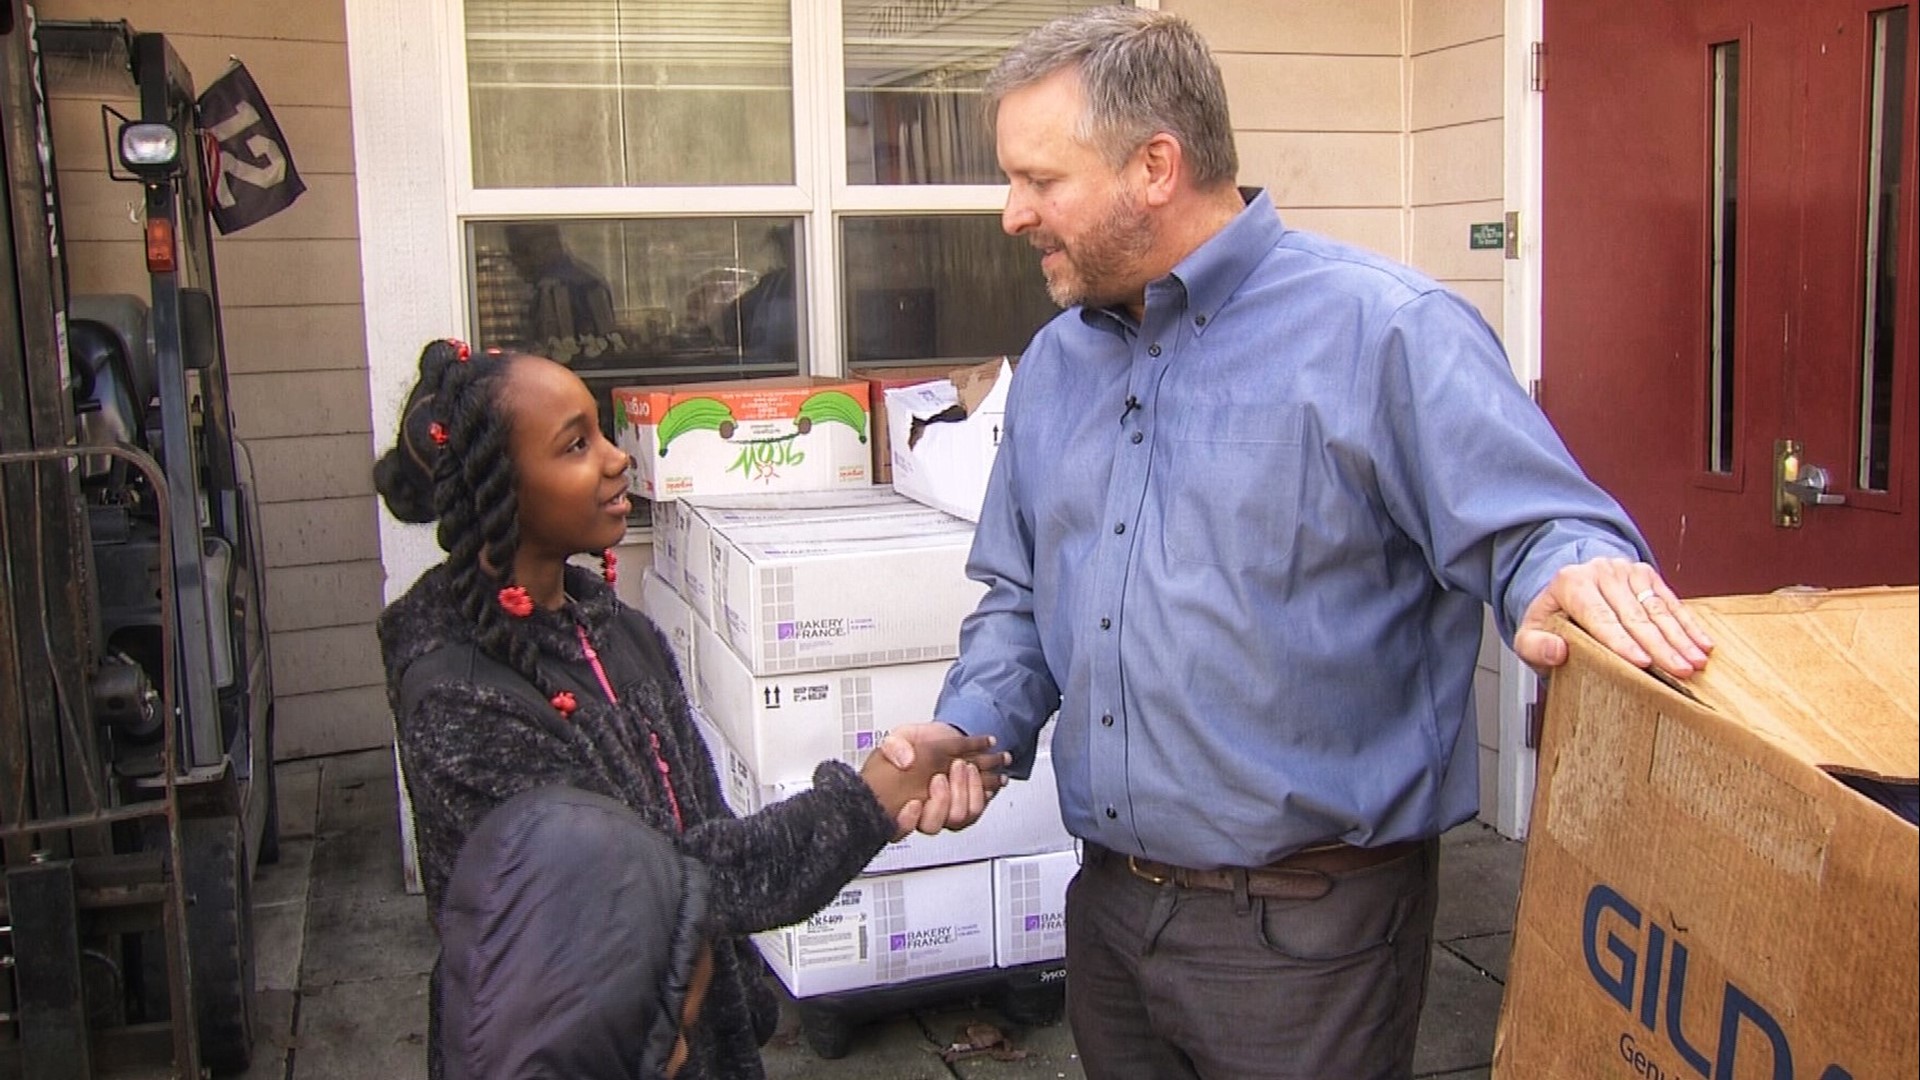 Samara Canley has been helping her community since she was 5. Sponsored by Kaiser Permanente